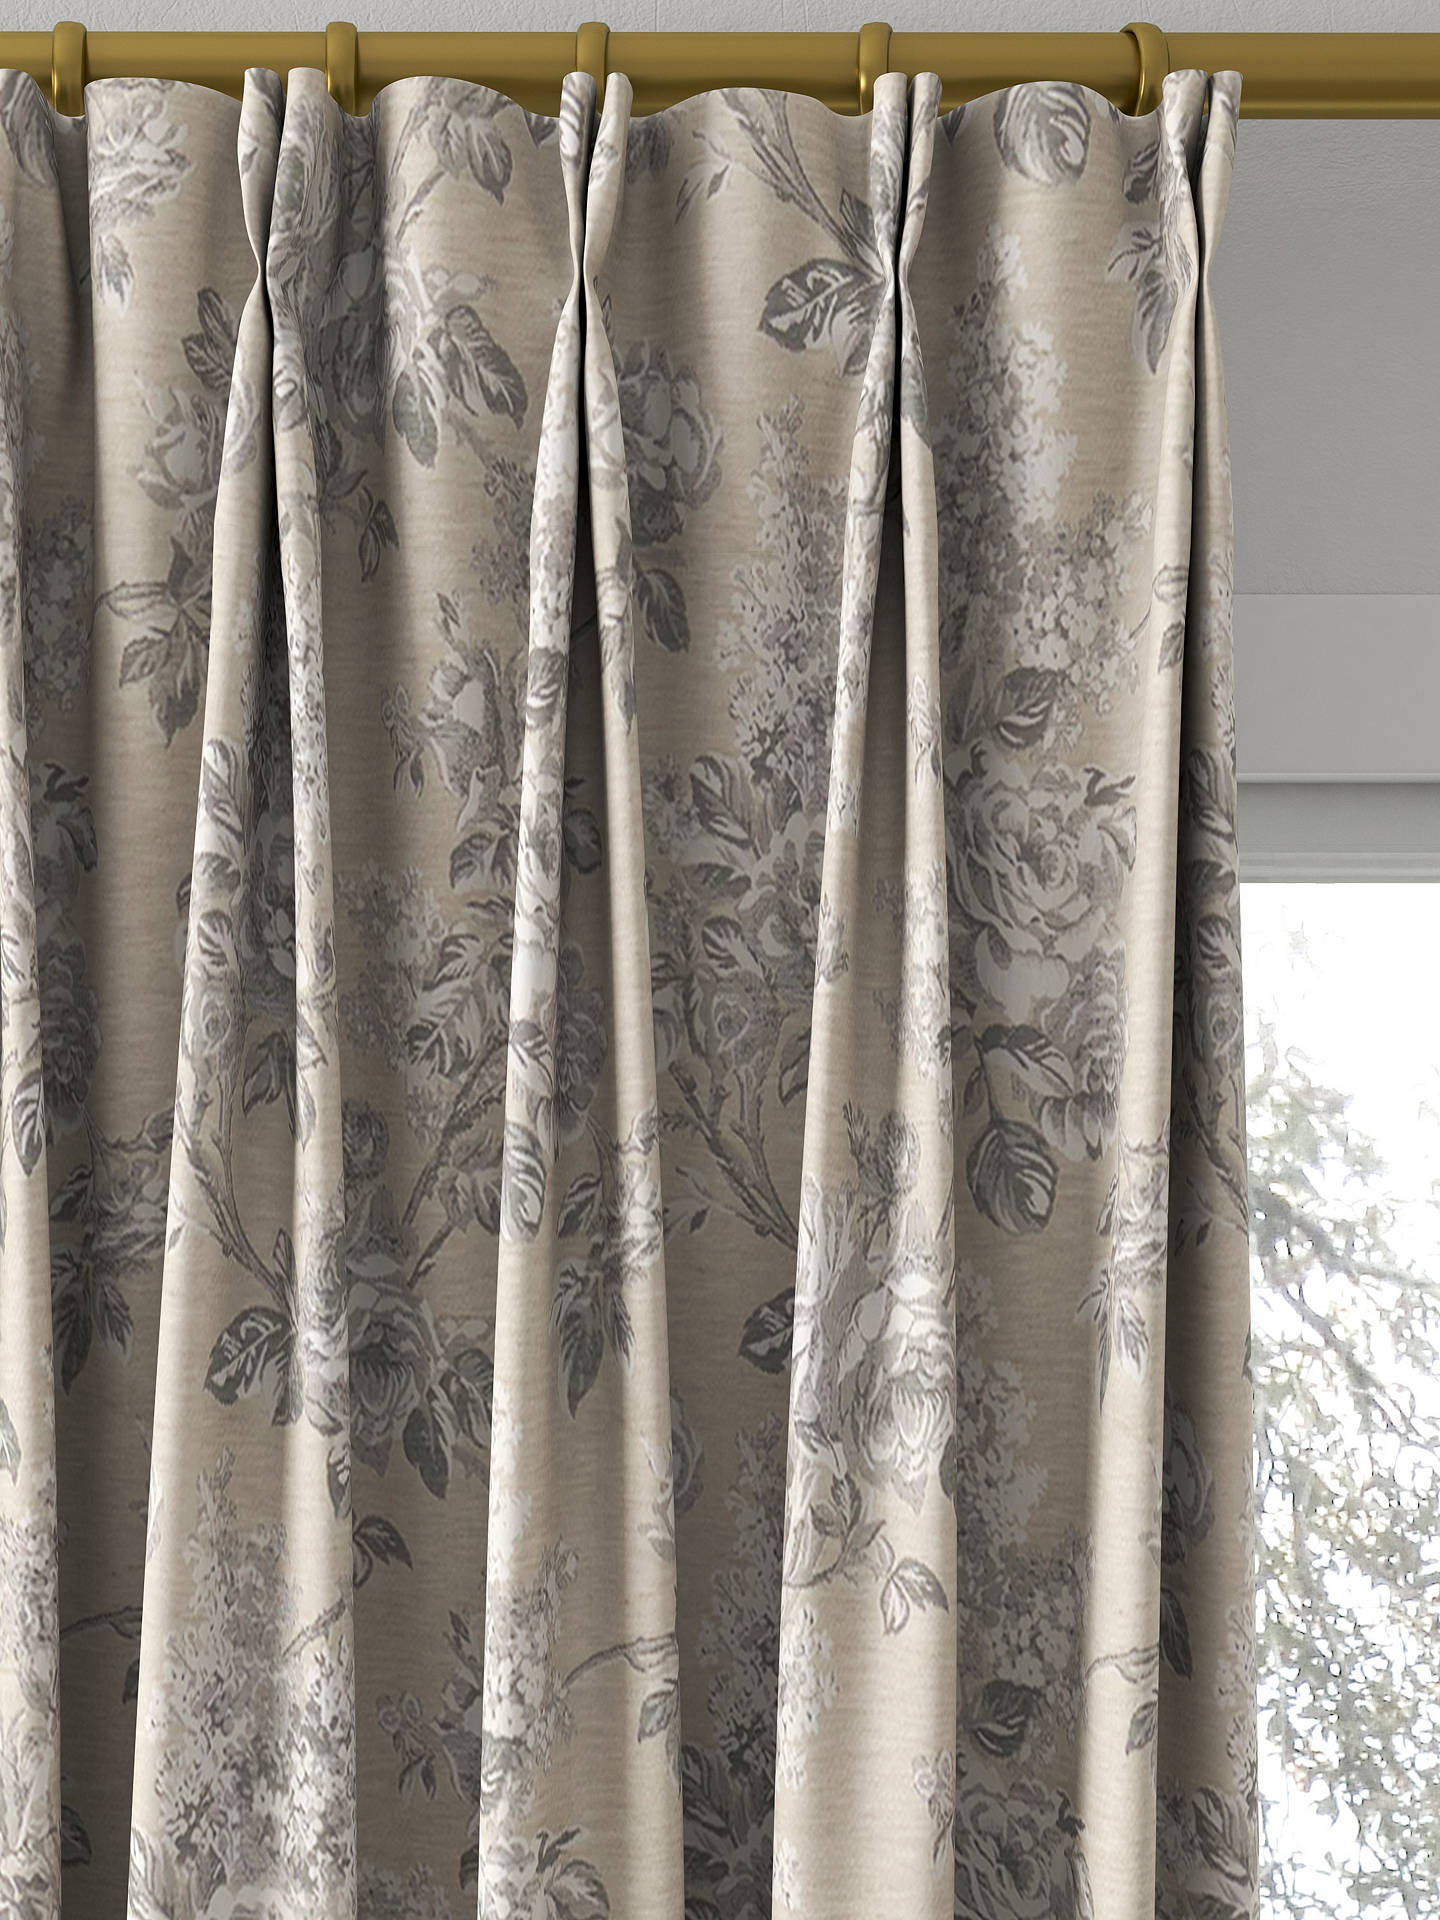 Sanderson Sorilla Damask Made to Measure Curtains, Silver/Linen